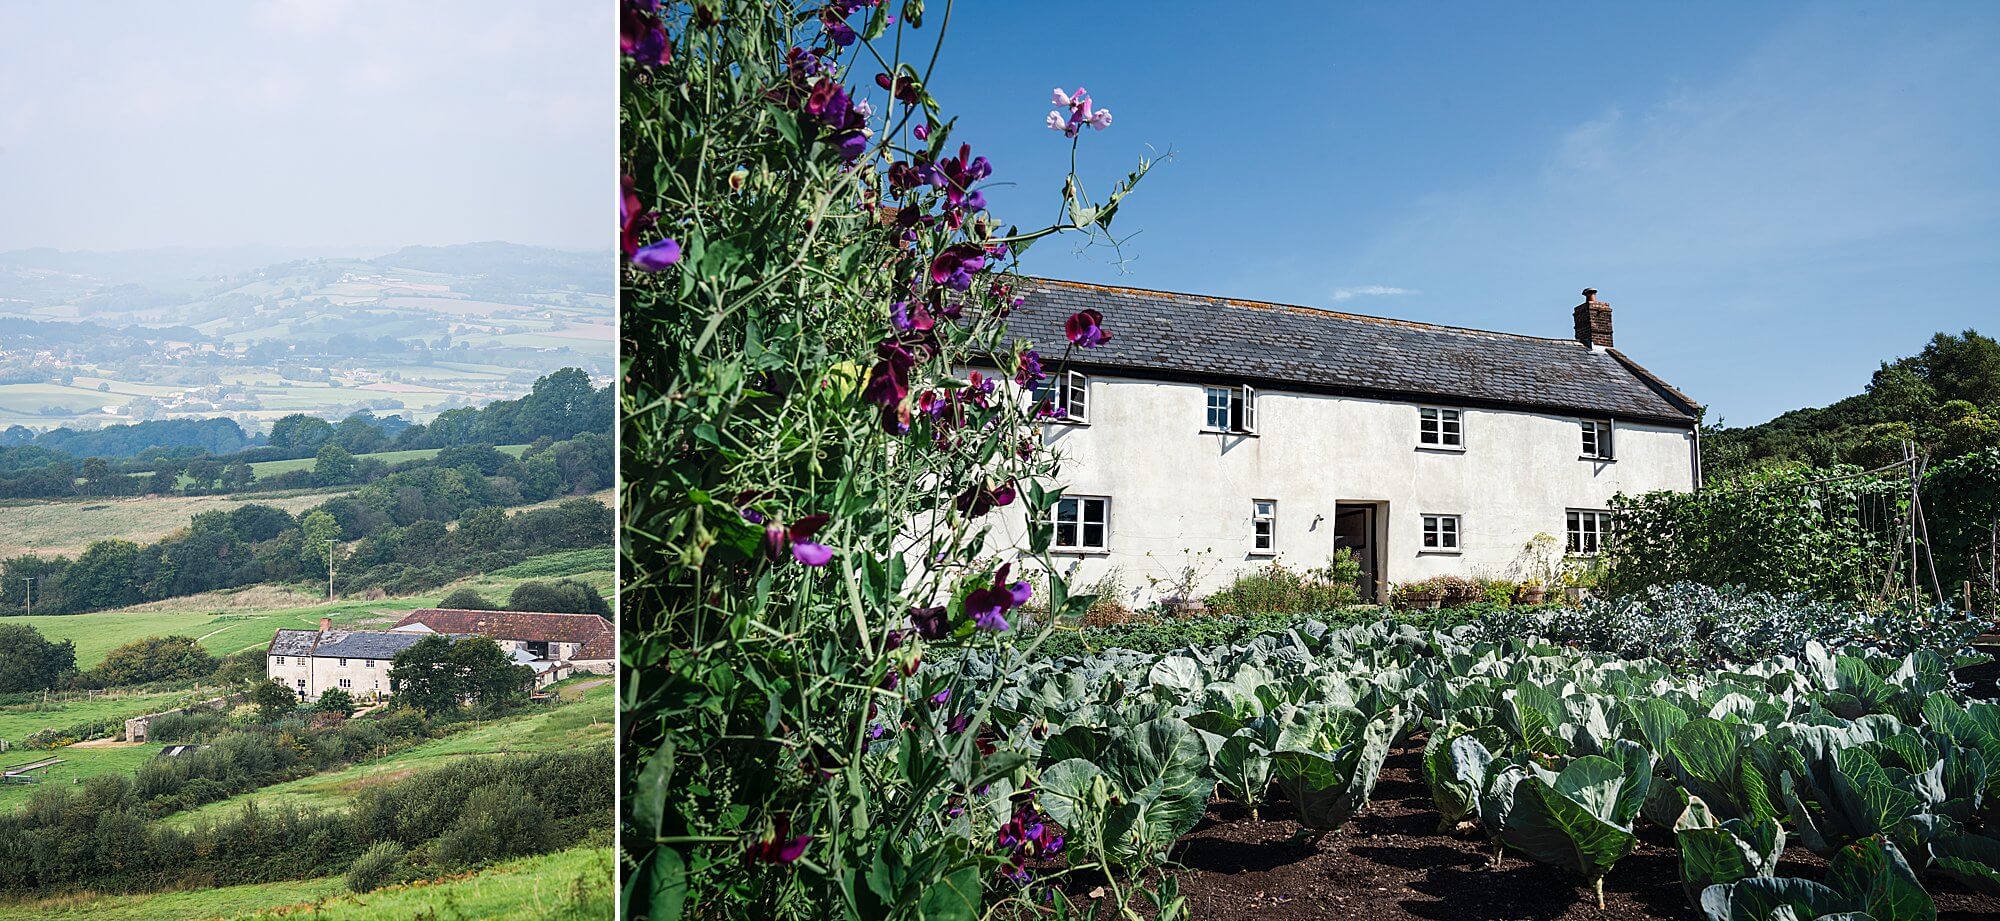 View of River Cottage and vegetable gardens set in the spectacular Axe Valley in Devon